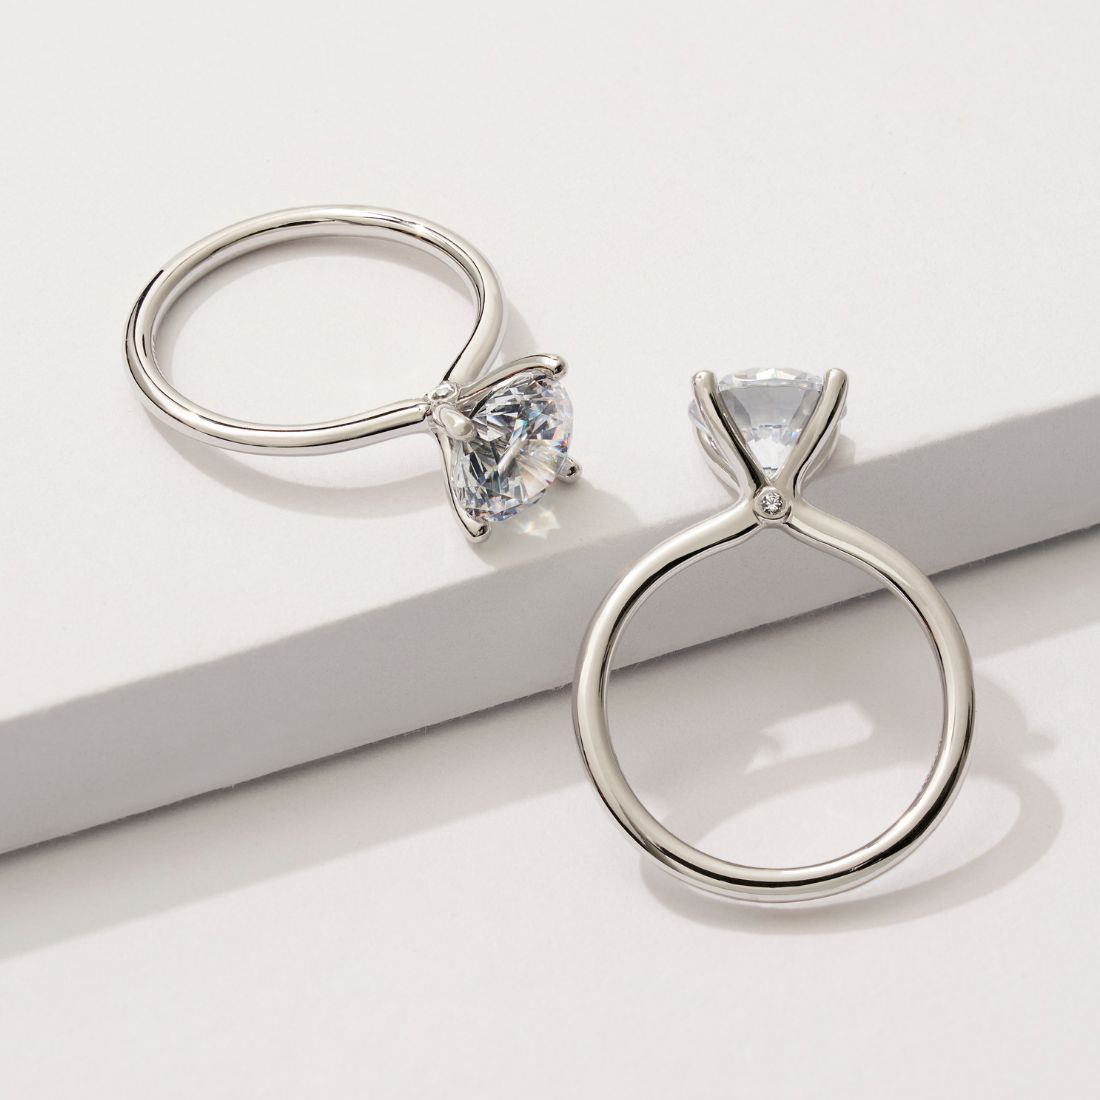 round cut solitaire engagement ring with a peek-a-boo diamond